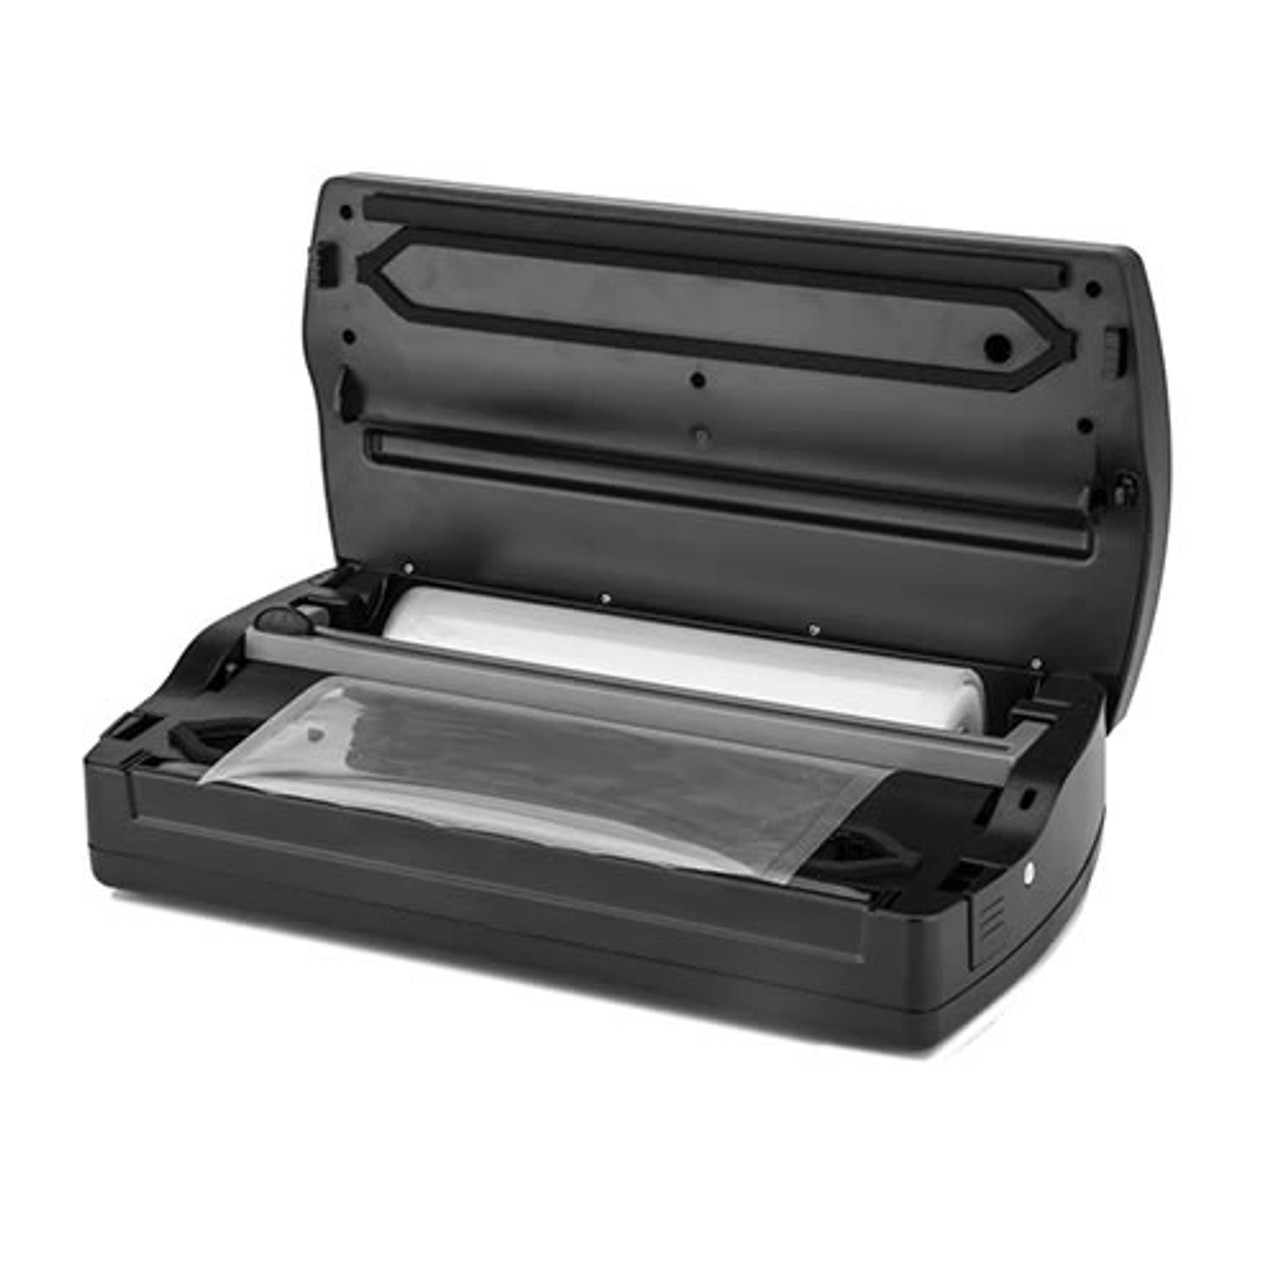 https://cdn11.bigcommerce.com/s-3n1nnt5qyw/images/stencil/1280x1280/products/9676/10833/excalibur-12-external-vacuum-sealer-w-roll-holder-built-in-model-ehvr12-5__44622.1629750688.jpg?c=1?imbypass=on